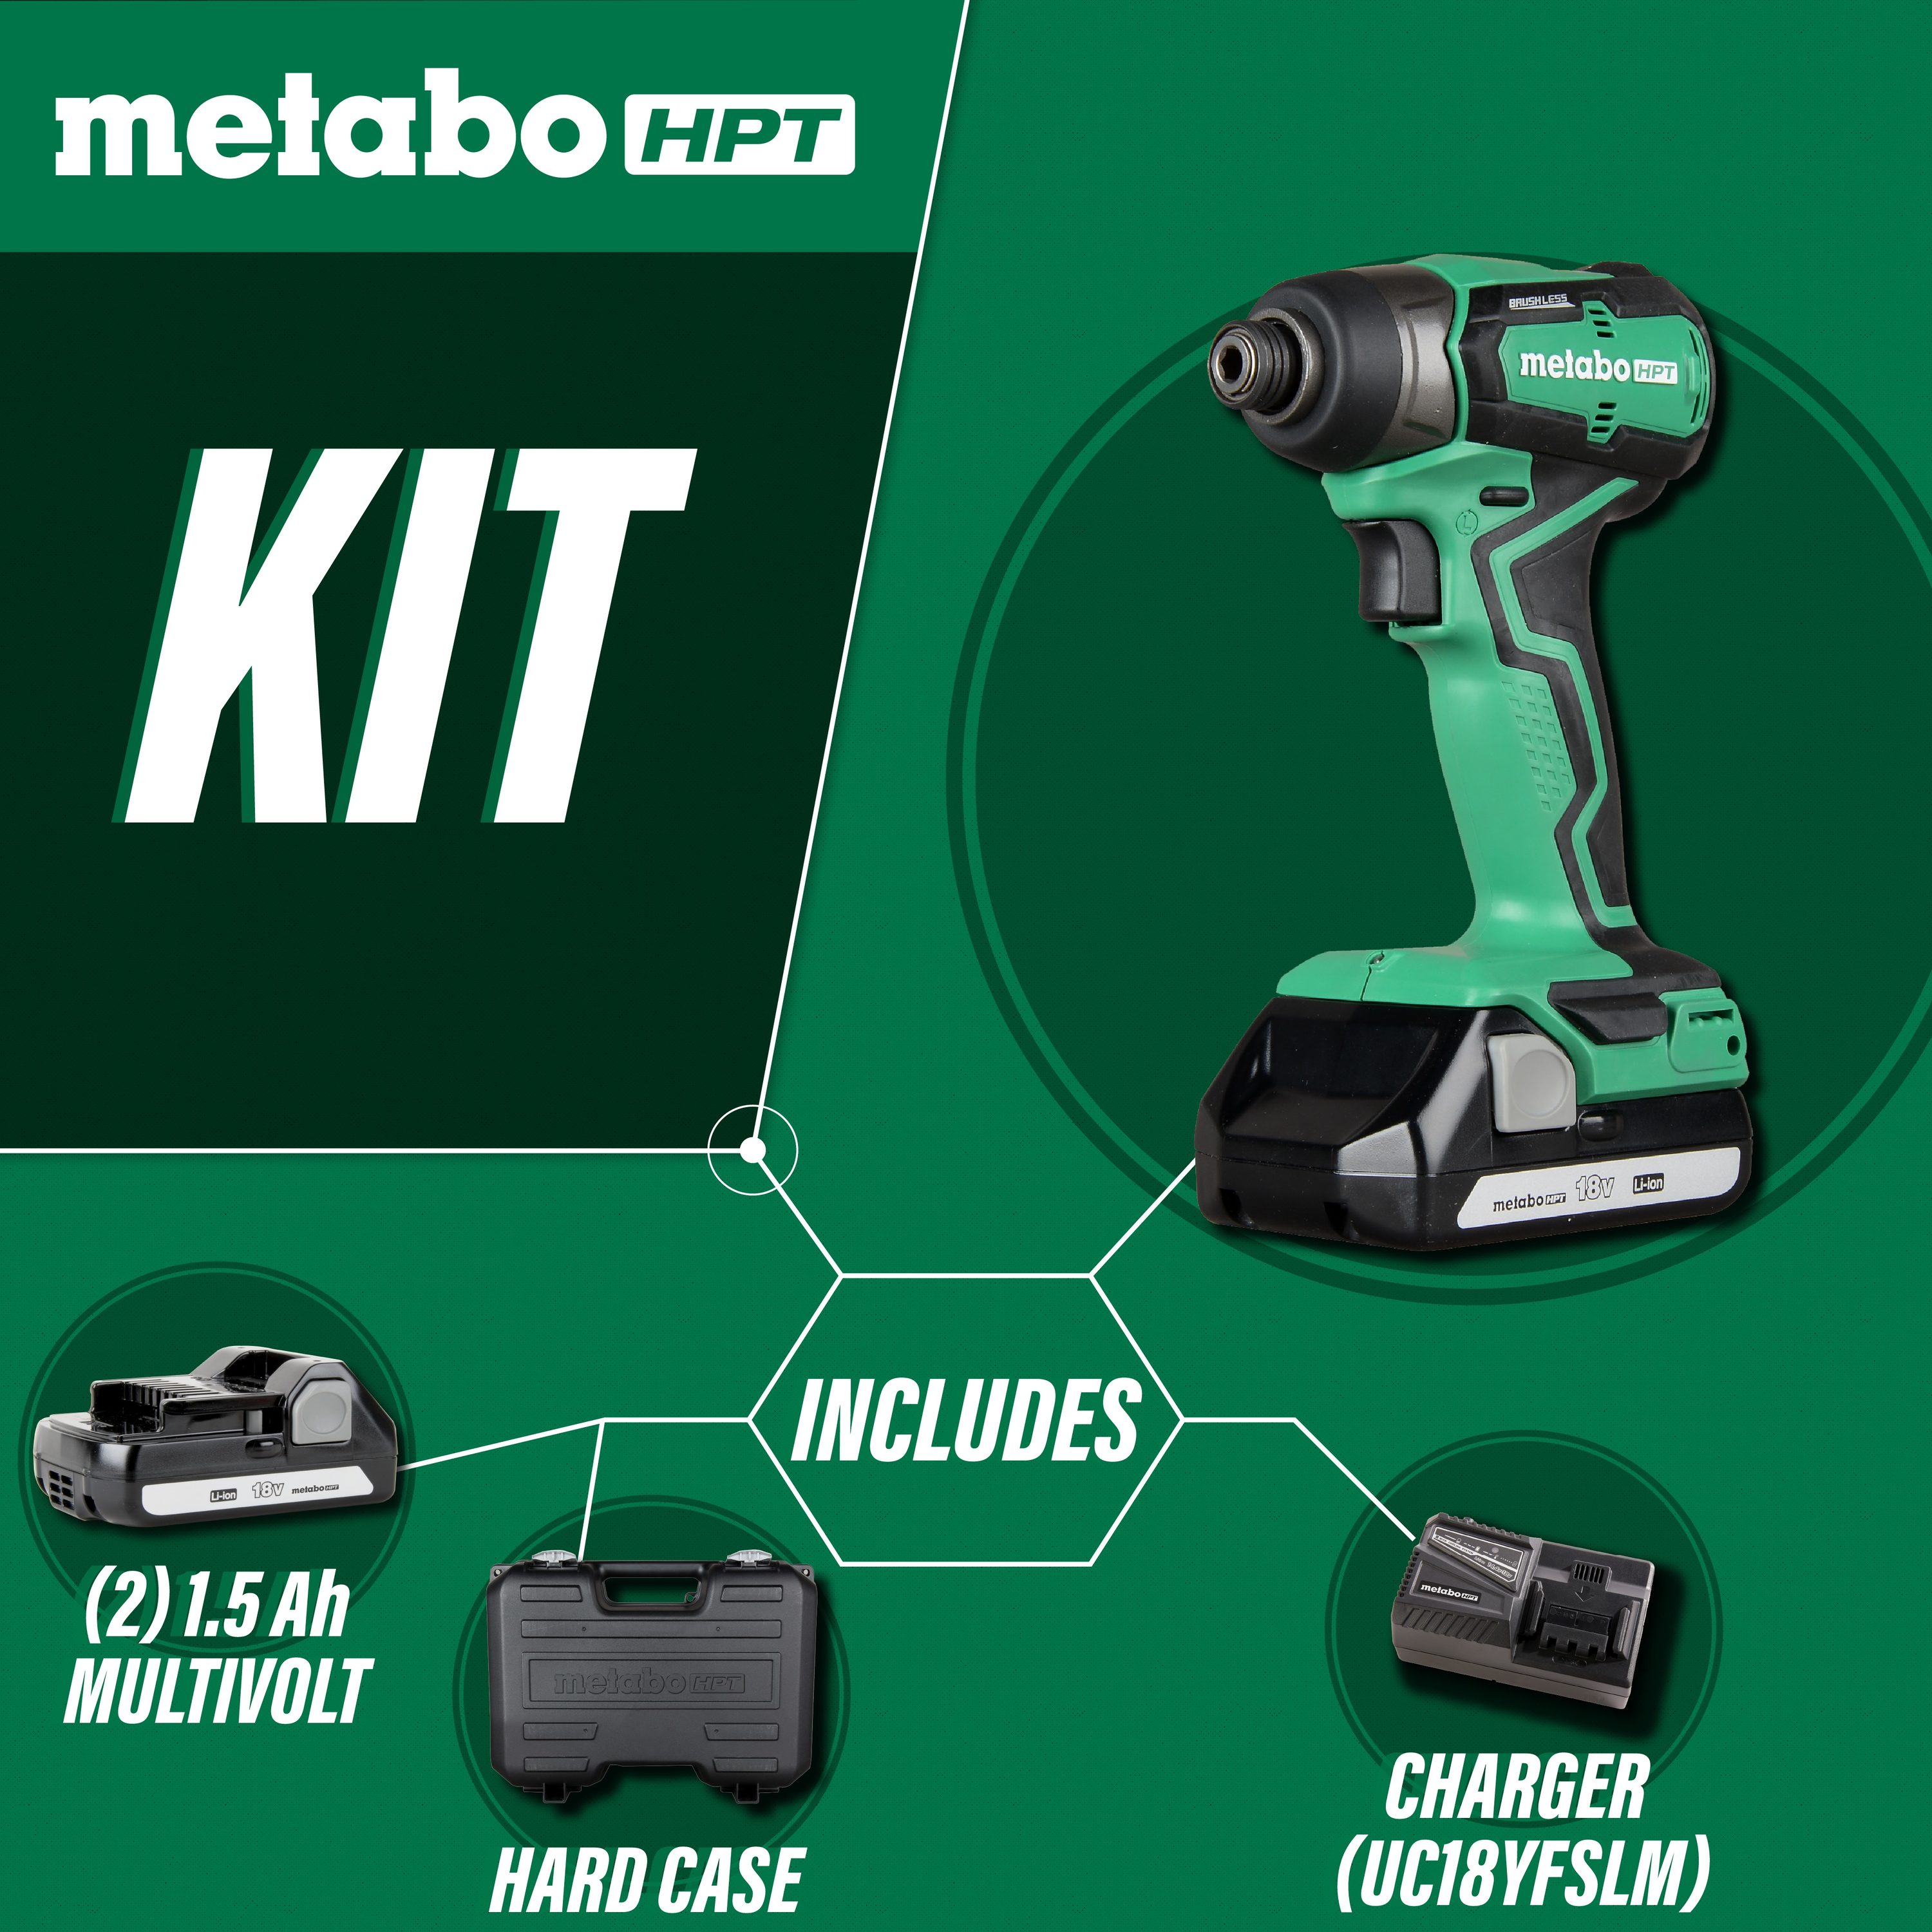 Metabo HPT MultiVolt 18-volt 1/4-in Variable Speed Brushless Cordless Impact Driver (2-Batteries Included)